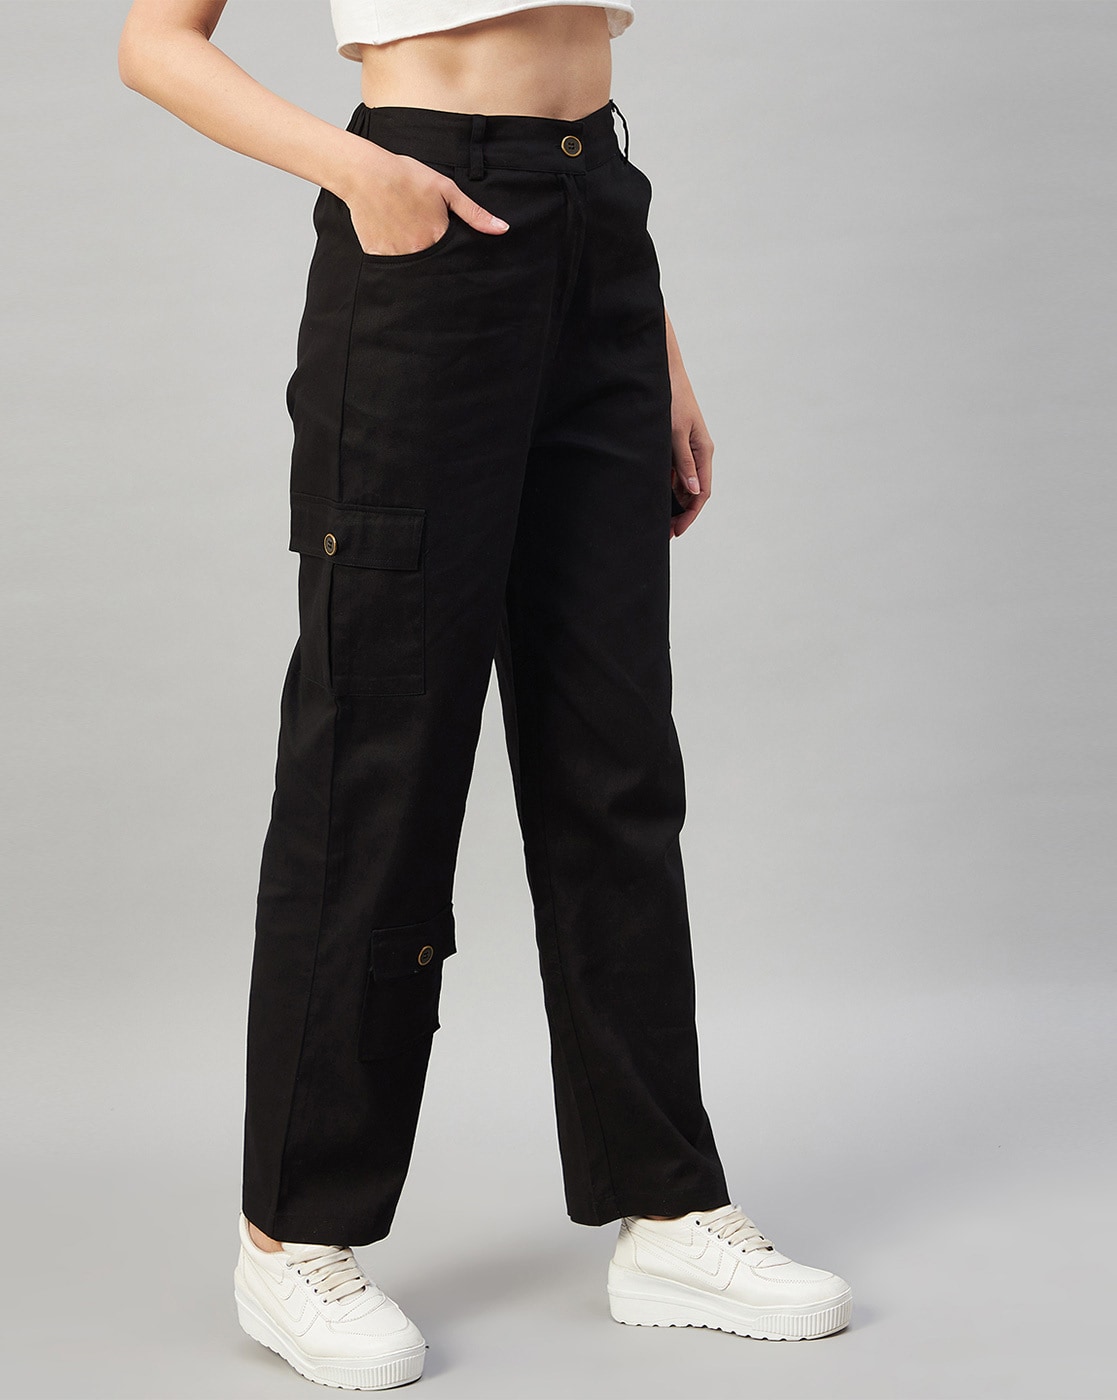 Buy Stylish Cargo Pants Online at Affordable Prices